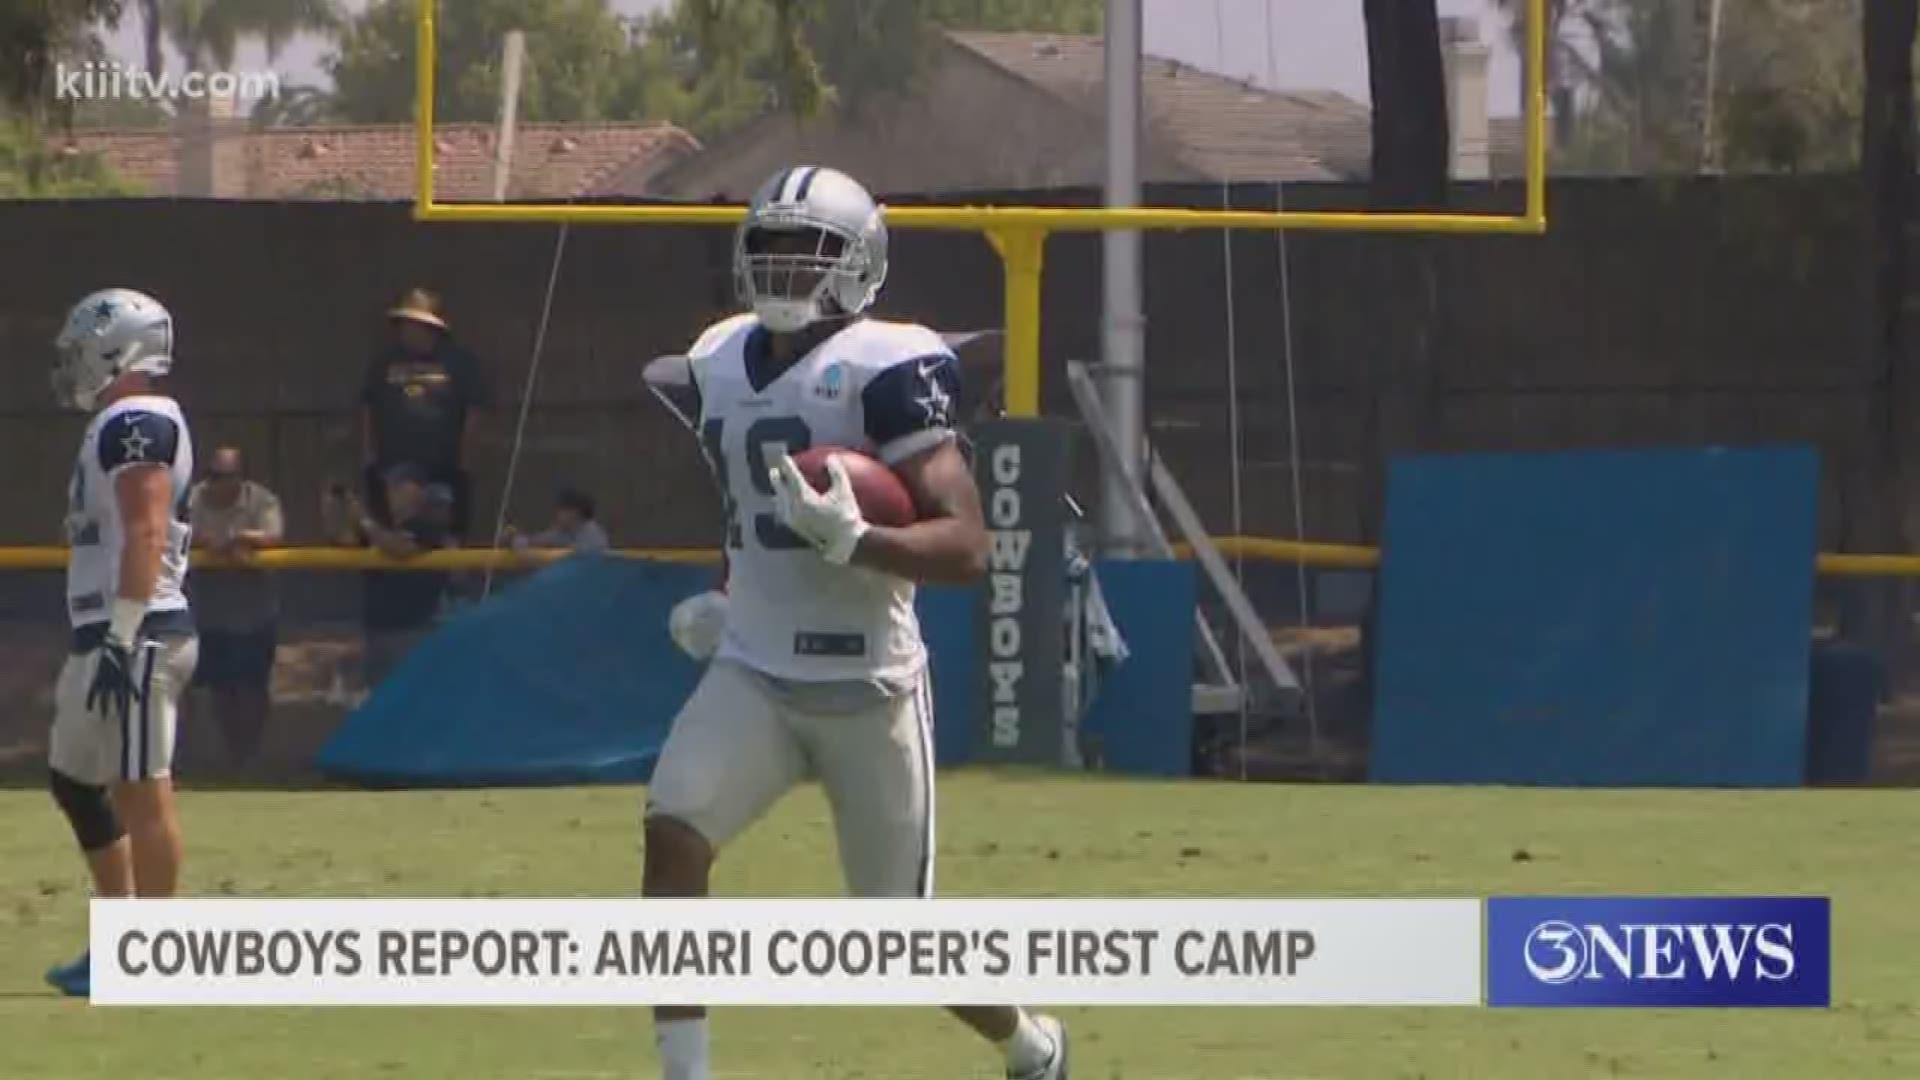 Cooper is in Oxnard for the first time after a big midseason trade last year.